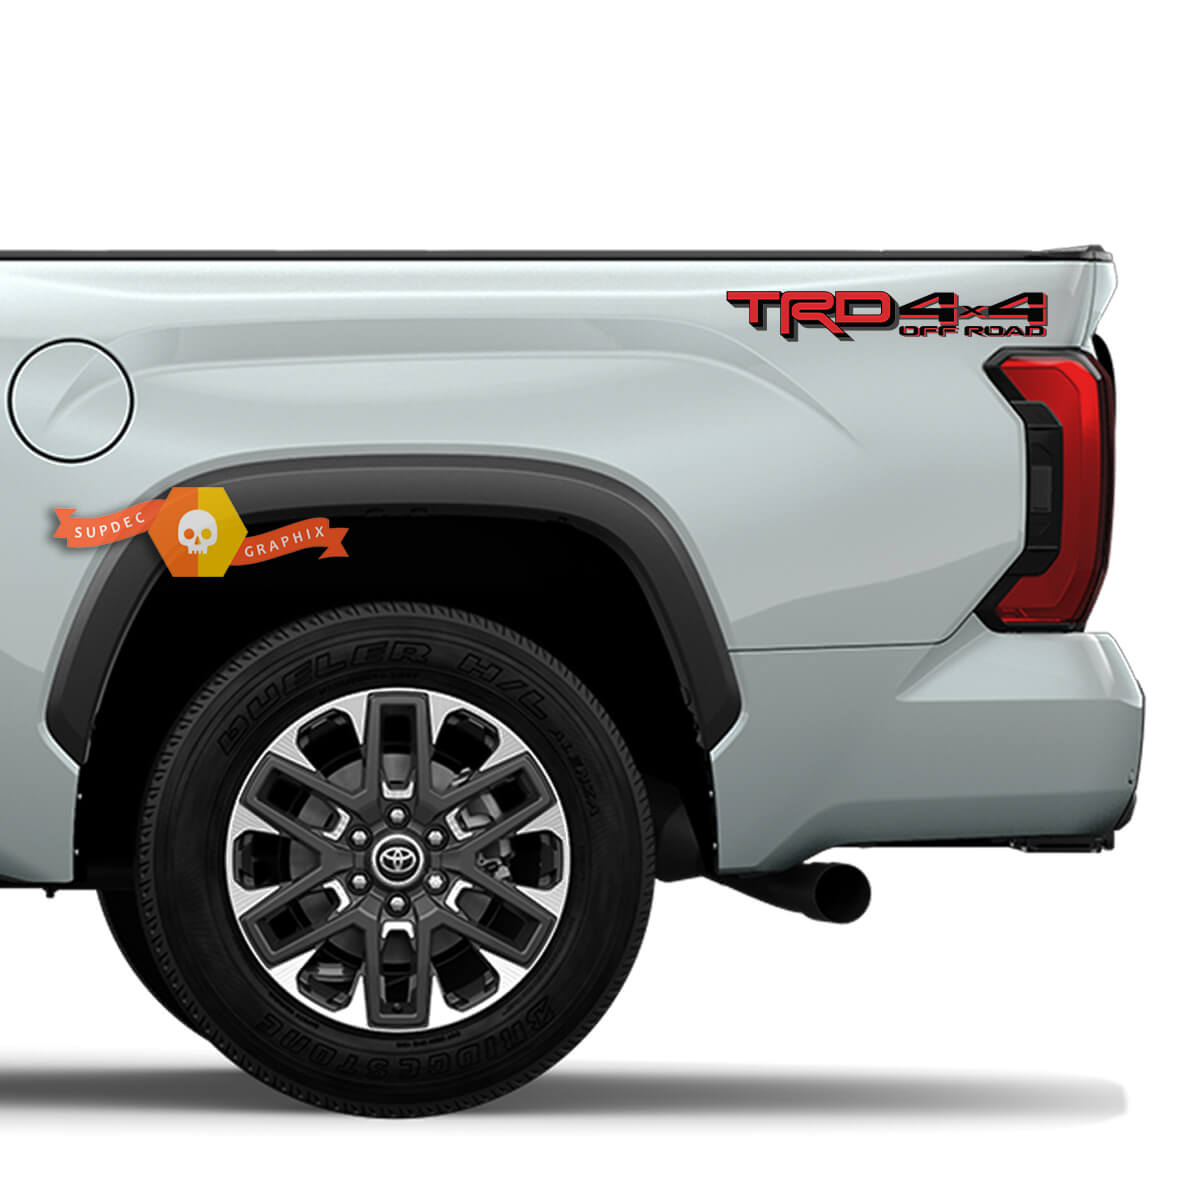 2 side 2022+ Toyota TRD Truck Off Road  4x4 Trd Off-Road Exterior-Tailgate Tacoma Tundra Decal Vinyl Sticker